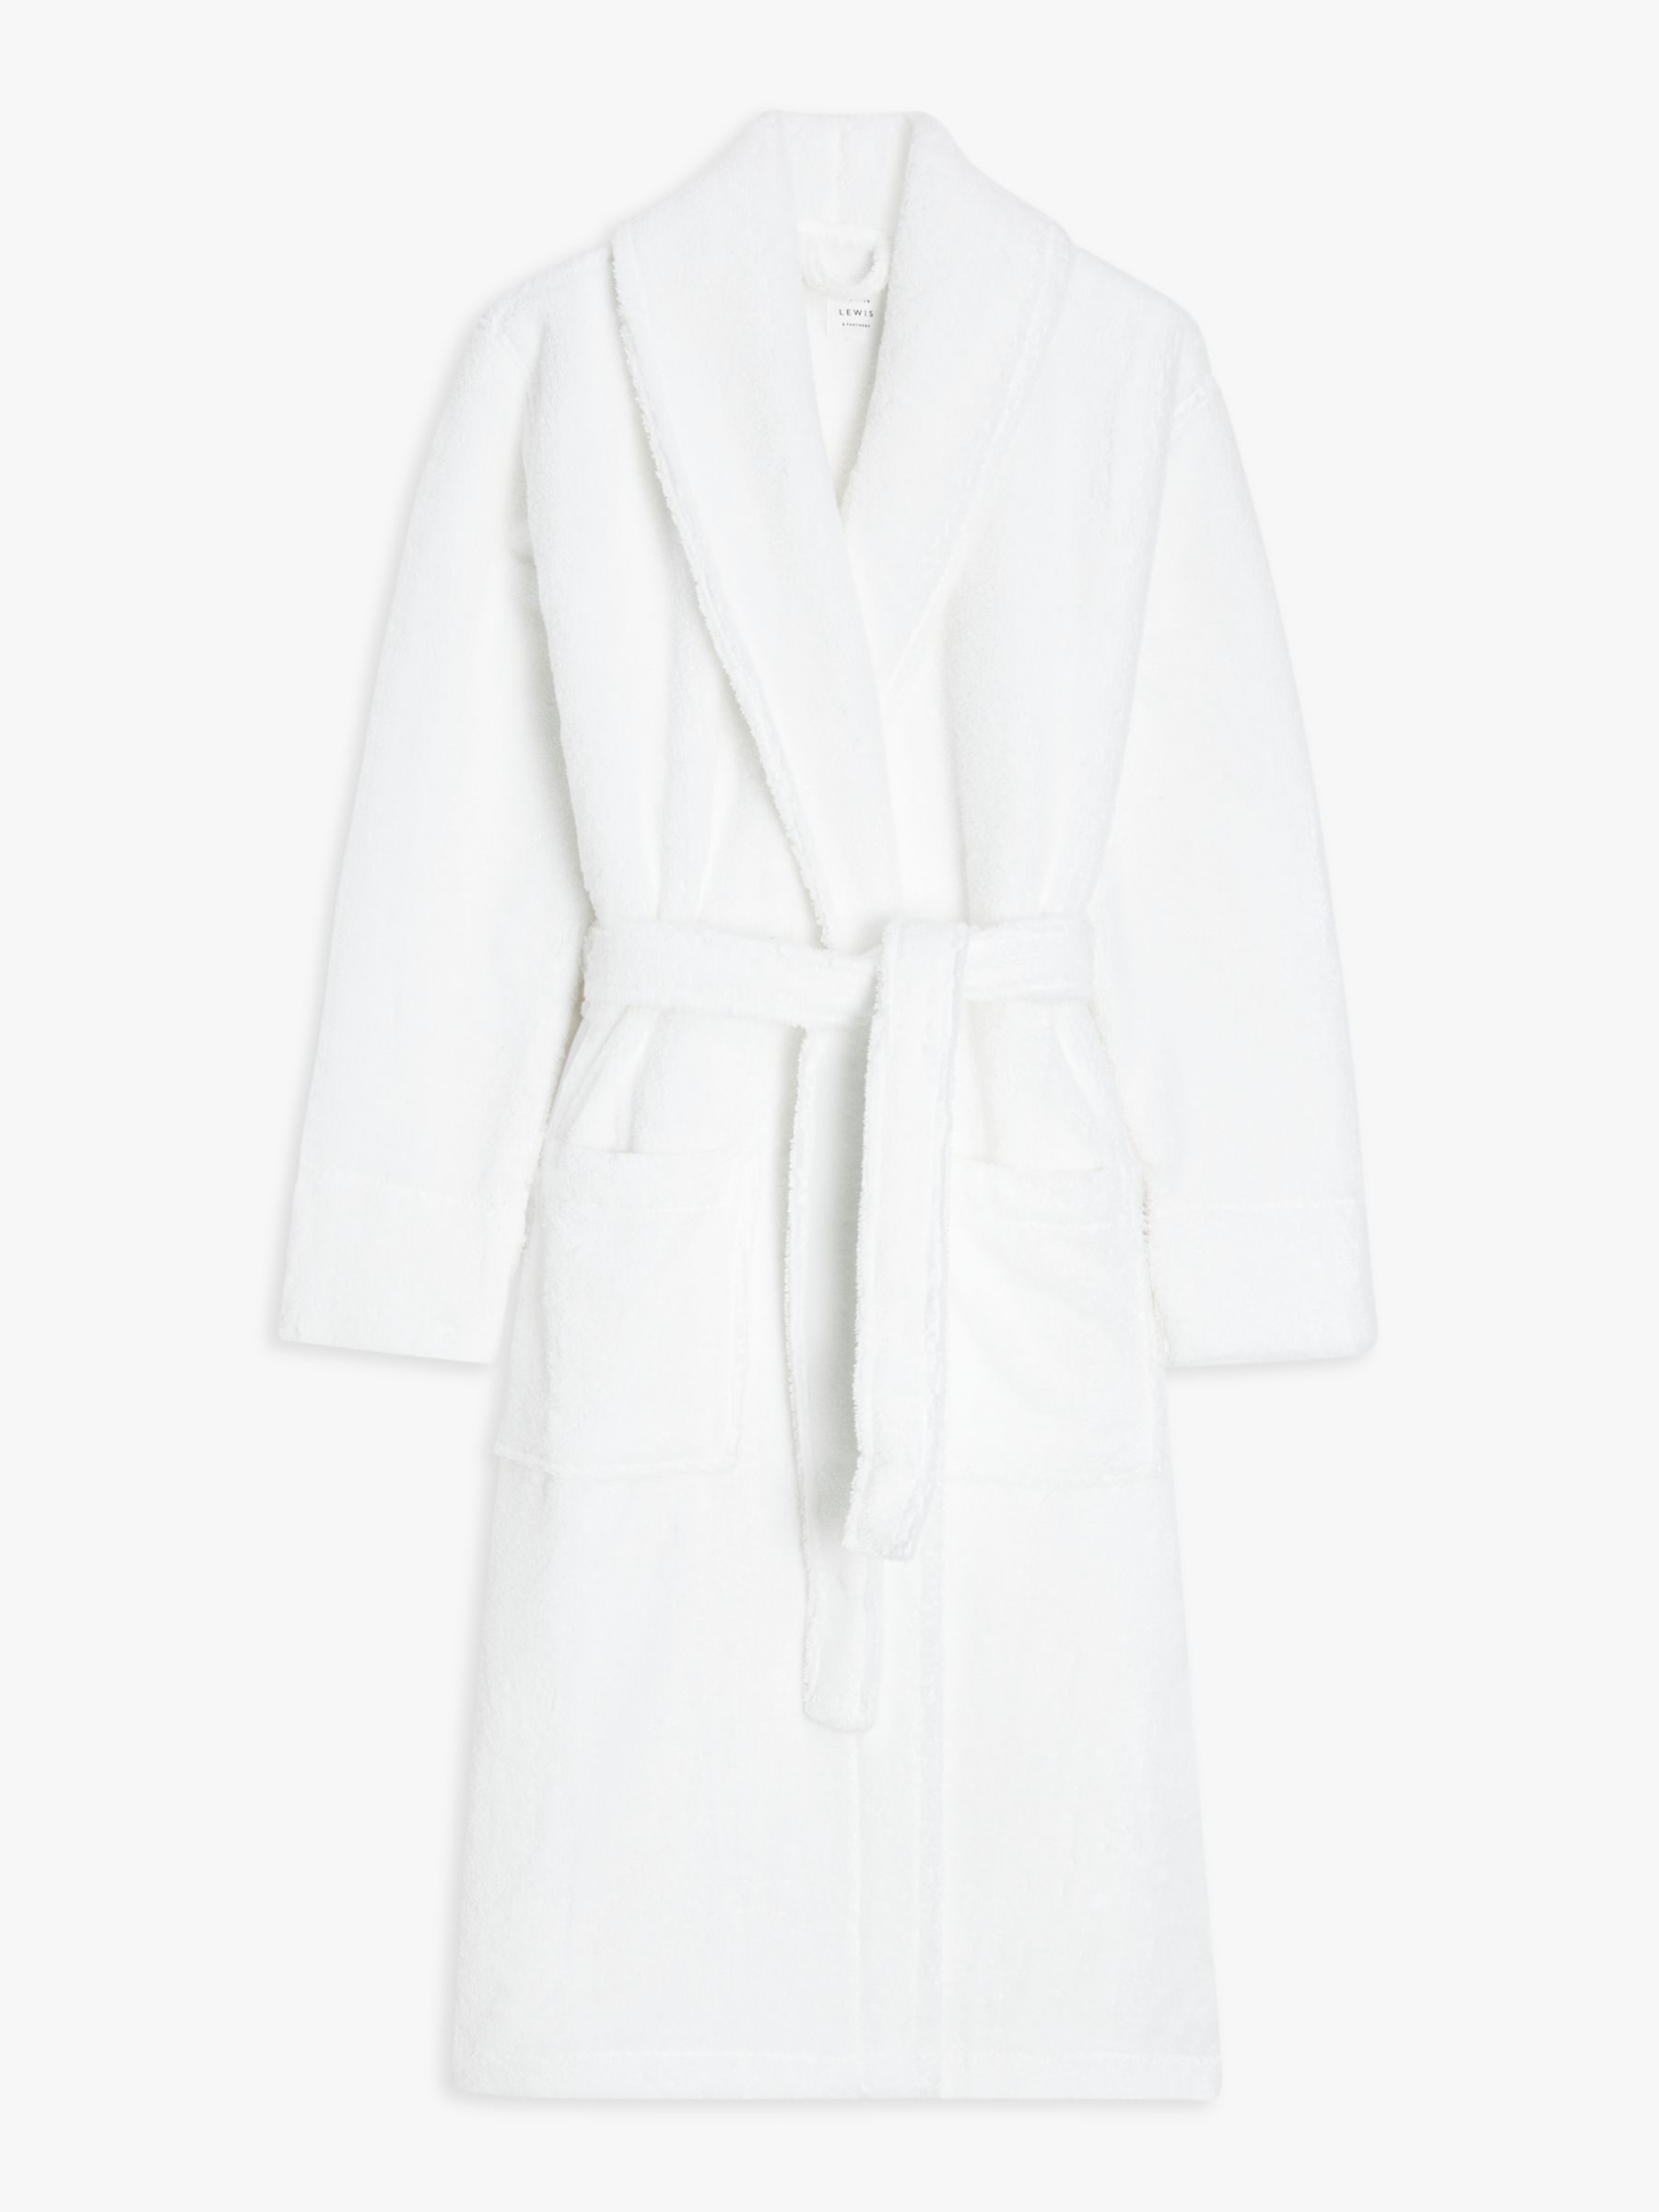 Mens Towelling Dressing Gowns John Lewis